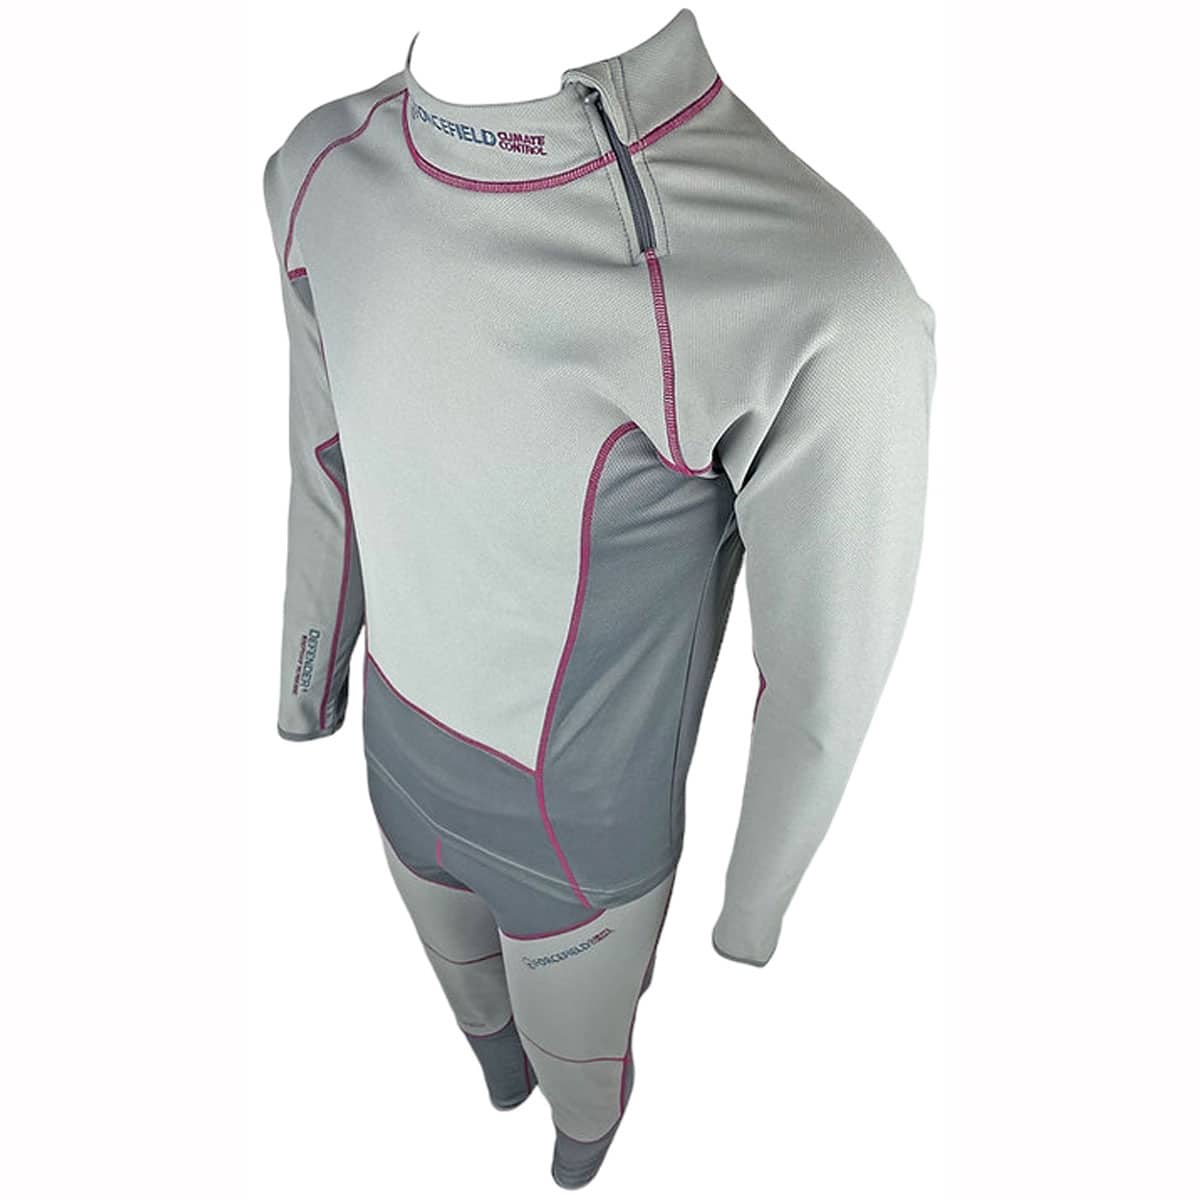 Forcefield Tornado Advance 2 Shirt Mid Layer: Highly technical windproof thermal layering